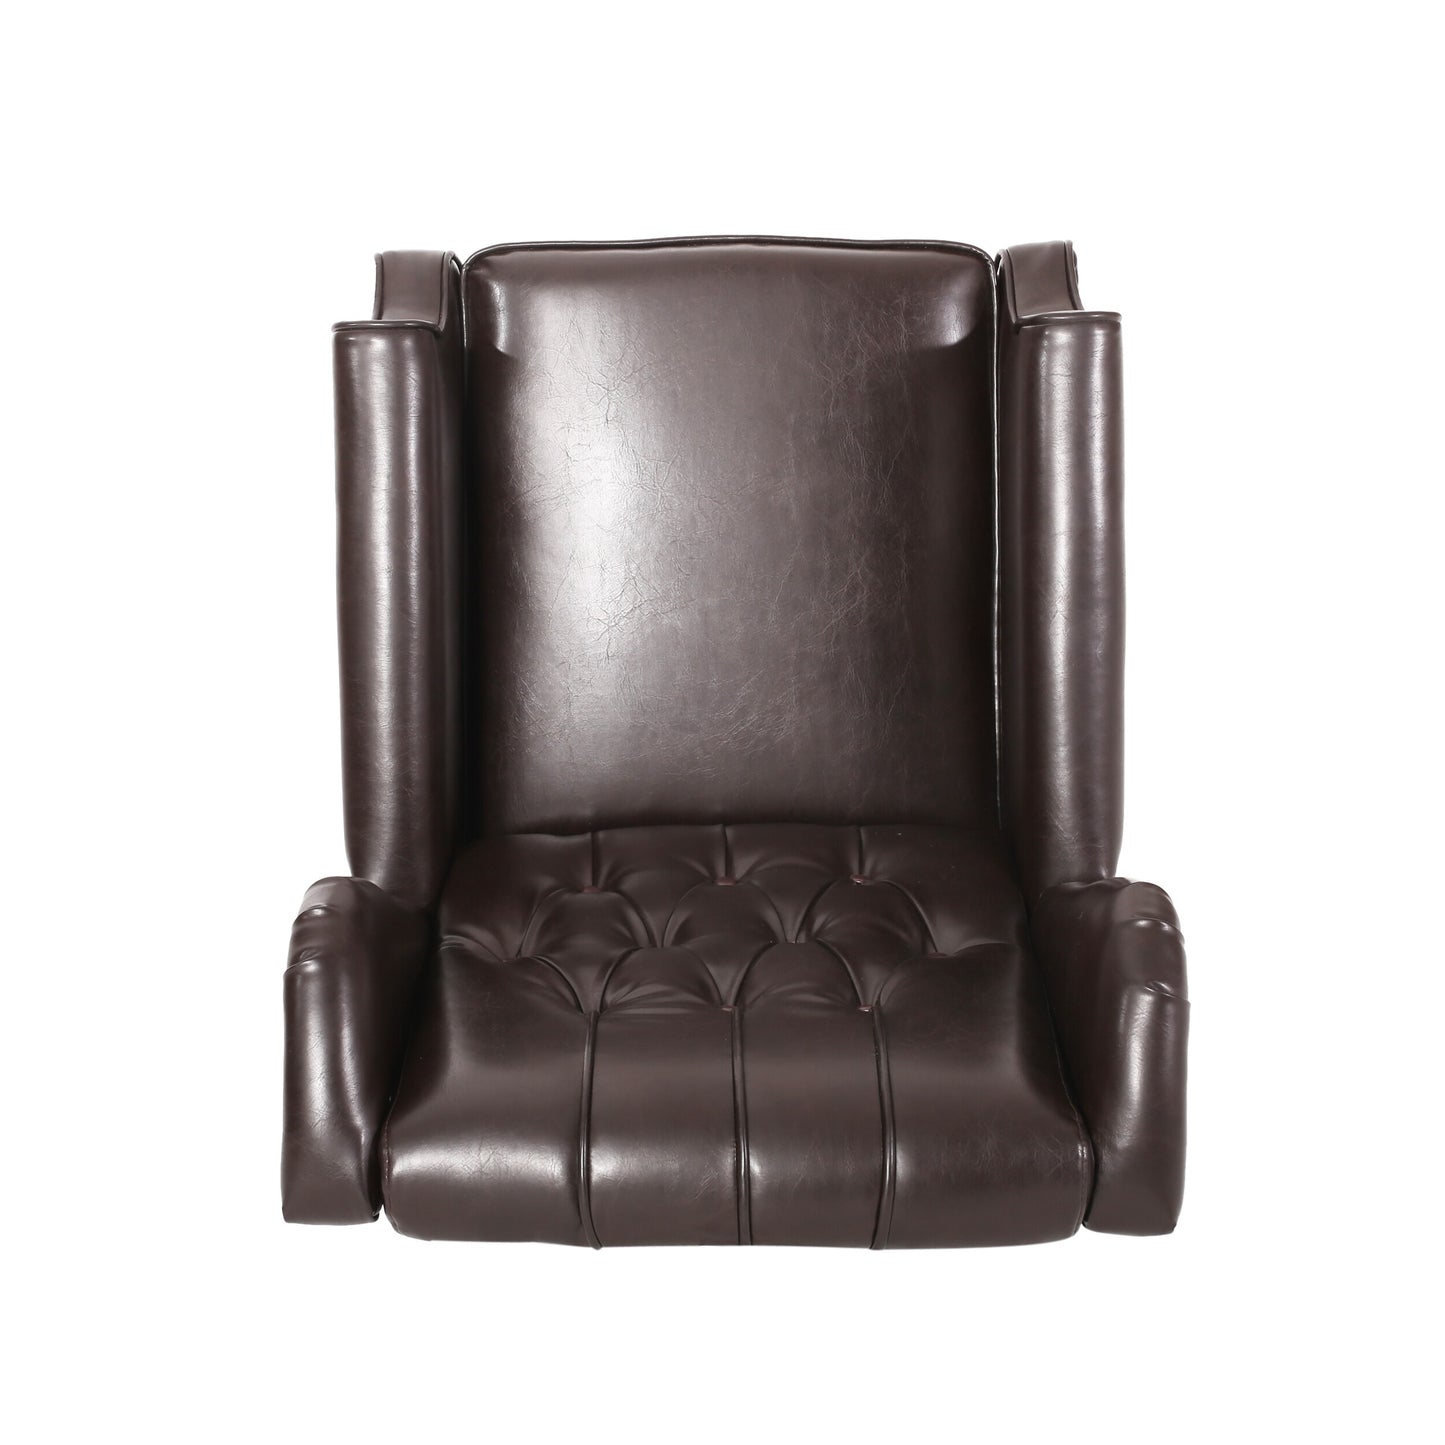 Walter Tufted Bonded Leather Recliner (Set of 2) by